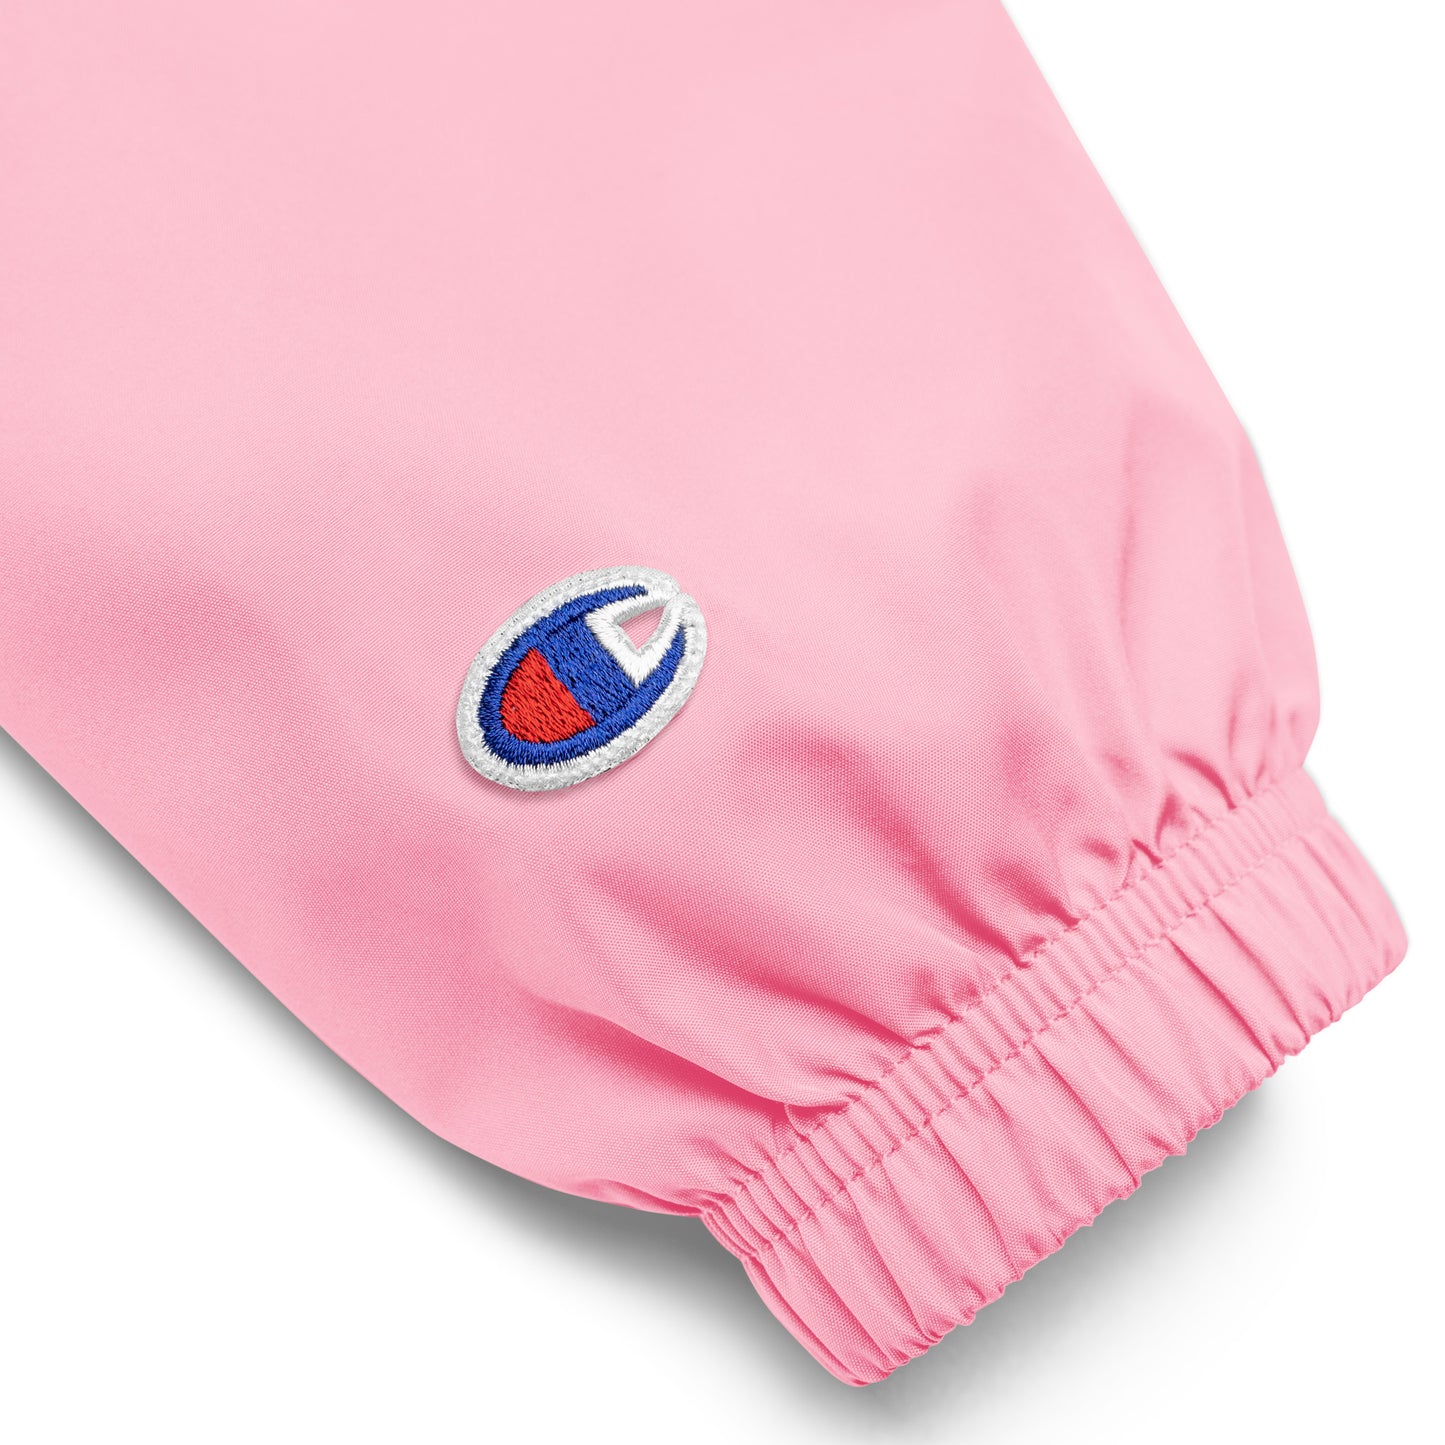 CBCF Packable Jacket by Champion